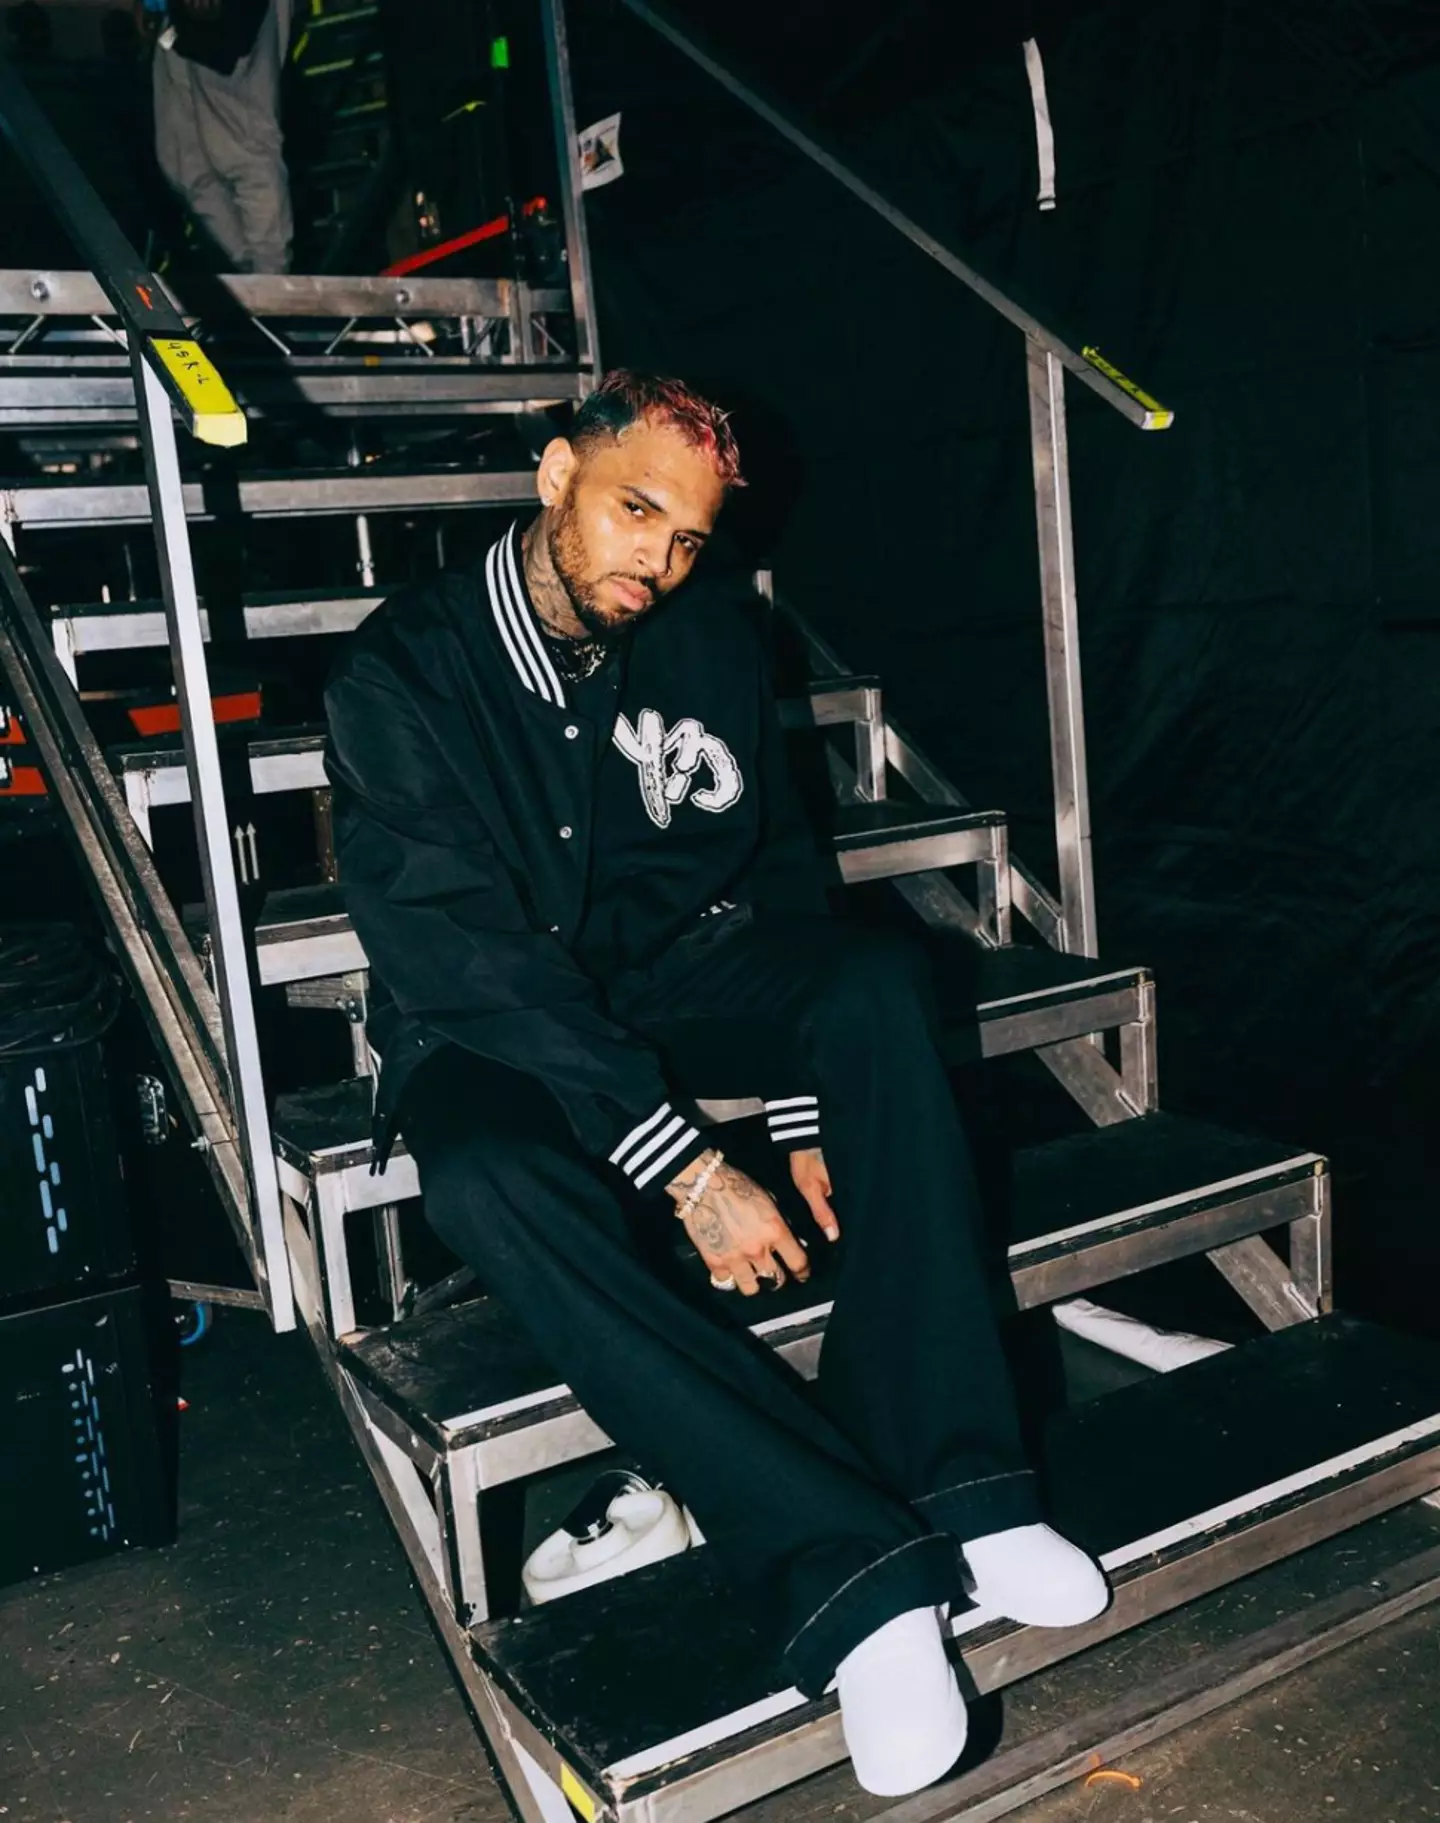 Chris Brown is currently on tour across Europe.